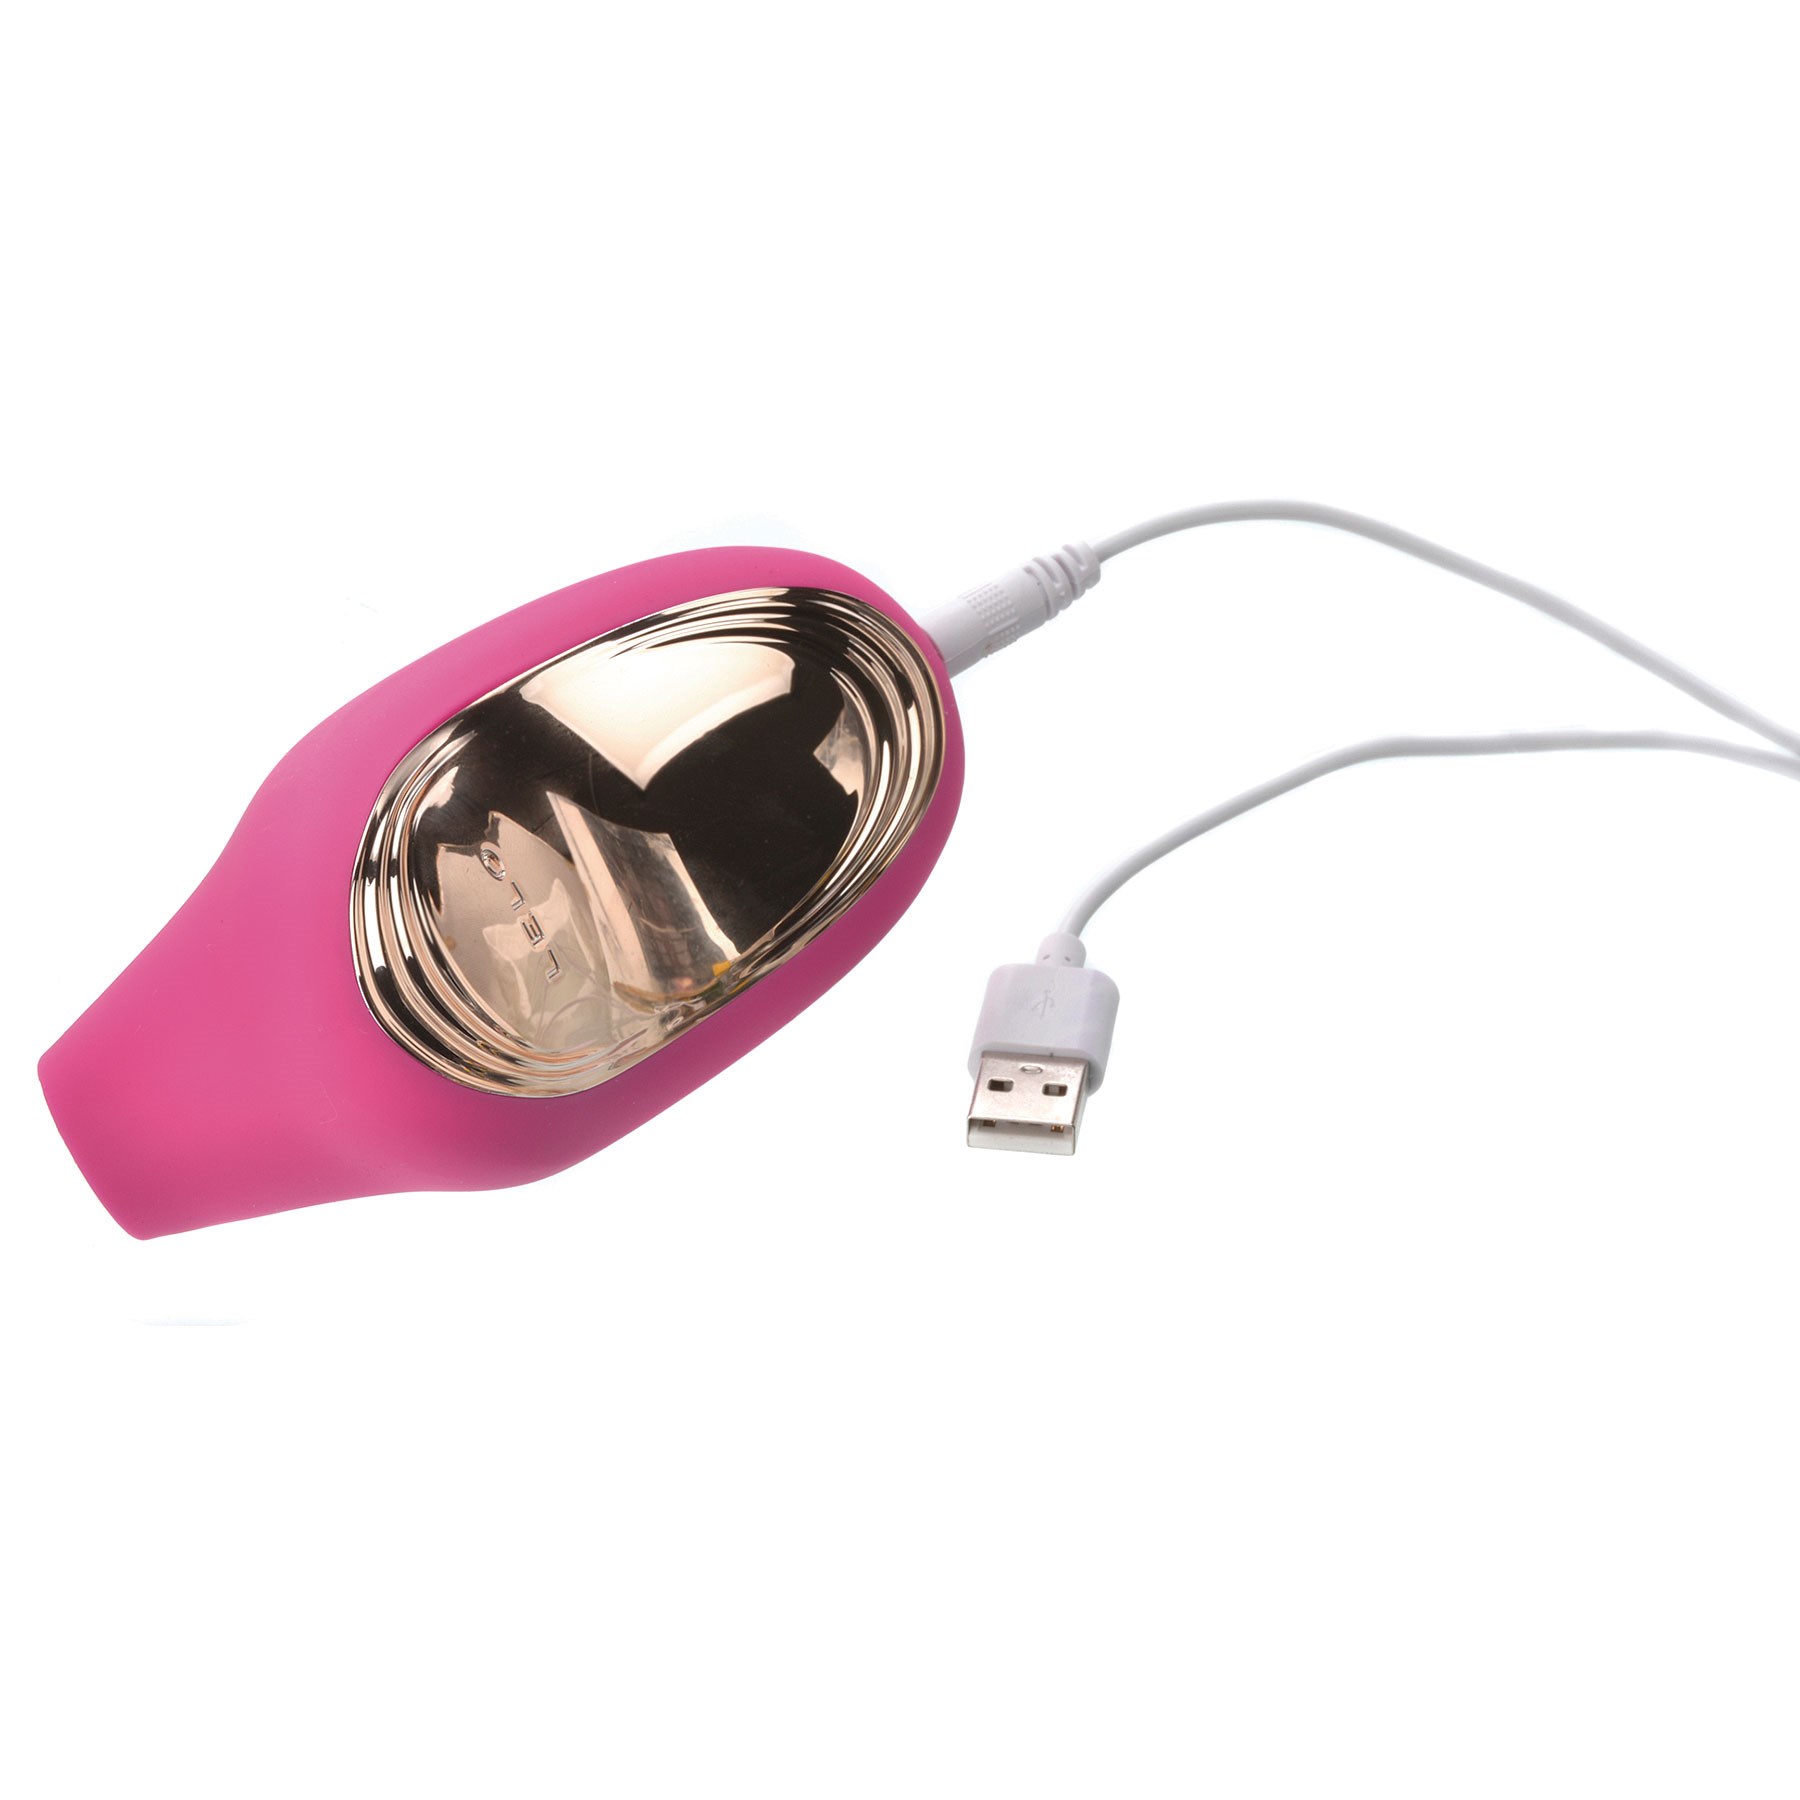 Sona 2 Sonic Clitoral Massager with charger